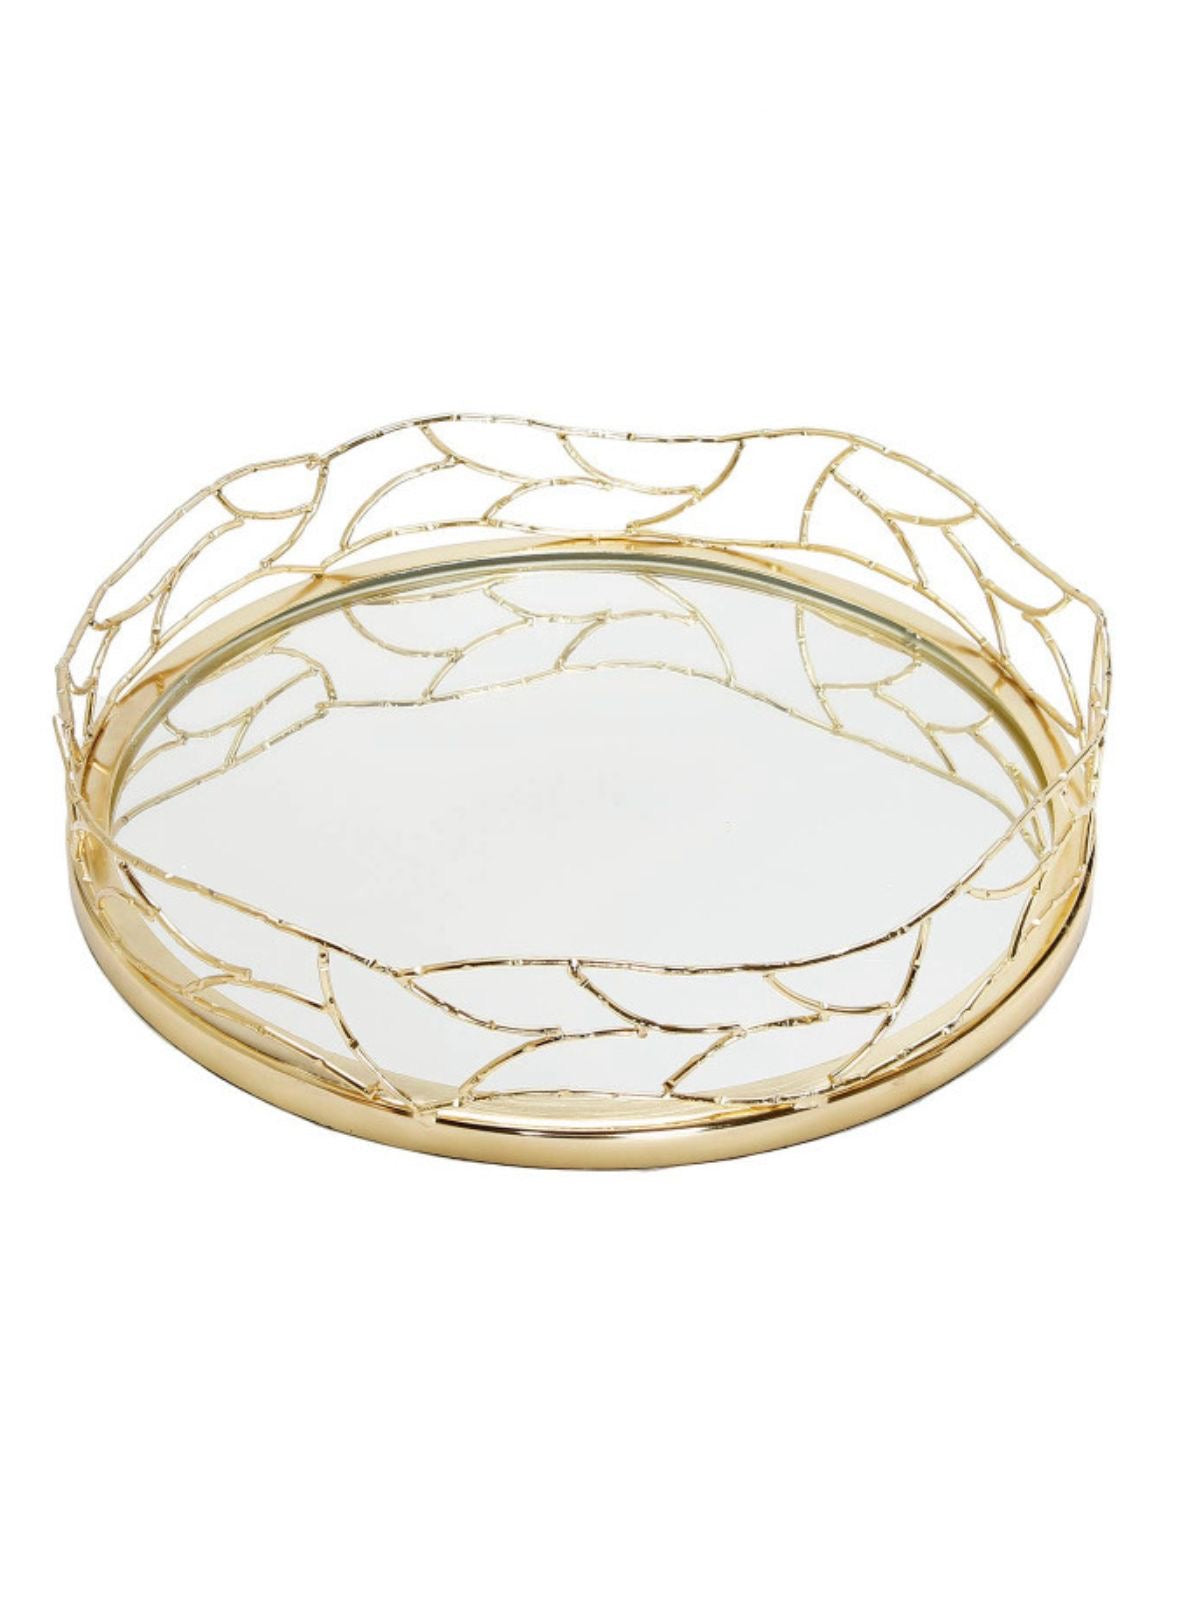 Round Mirror Tray With Gold Mesh Design Sold by KYA Home Decor.